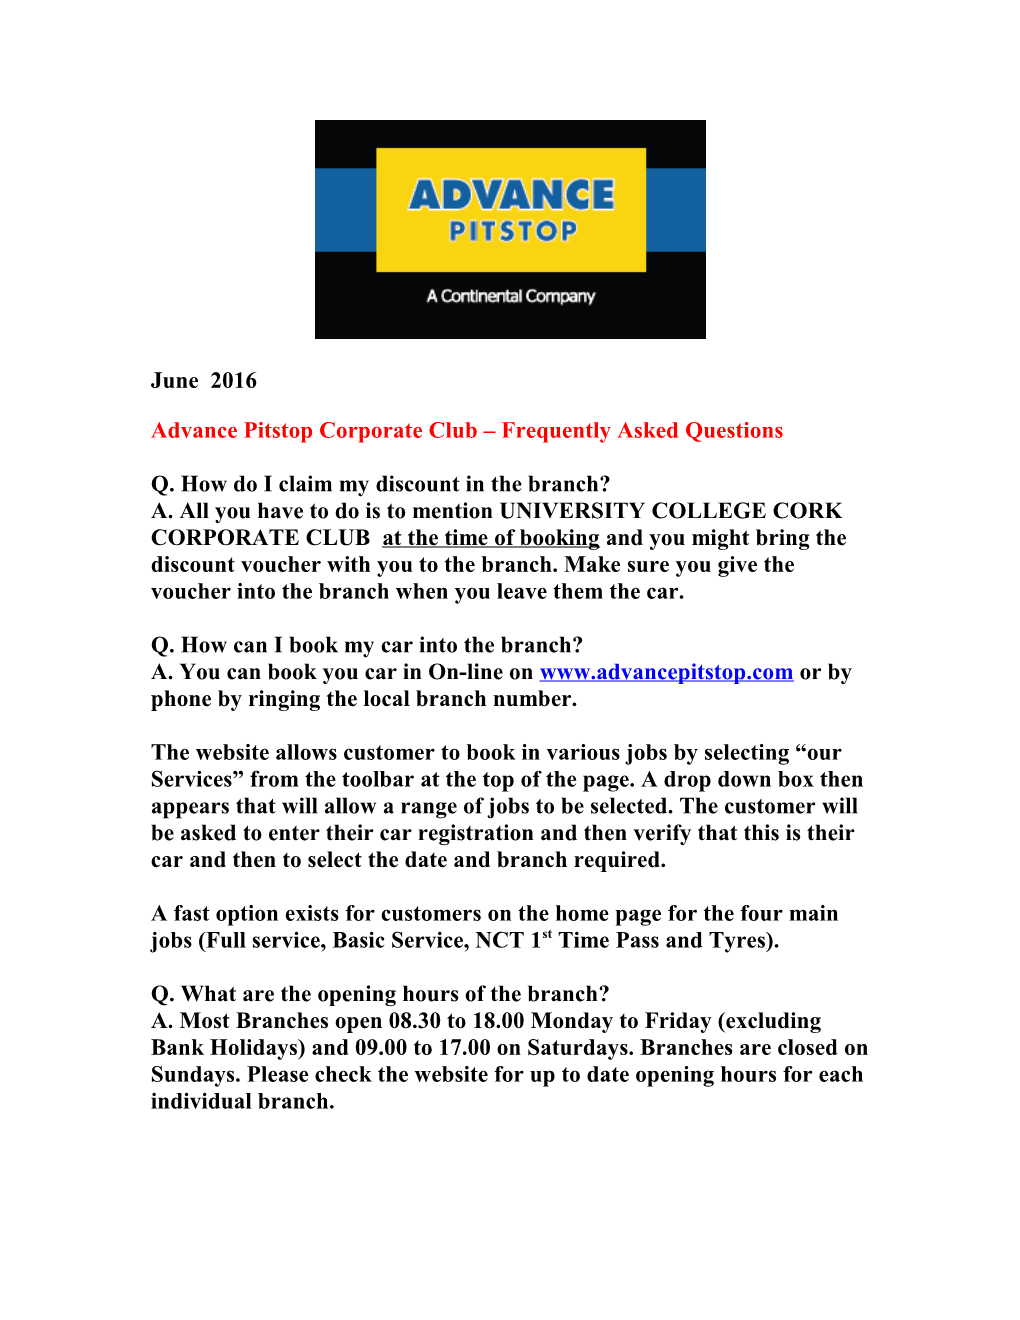 Advance Pitstop Corporate Club Frequently Asked Questions